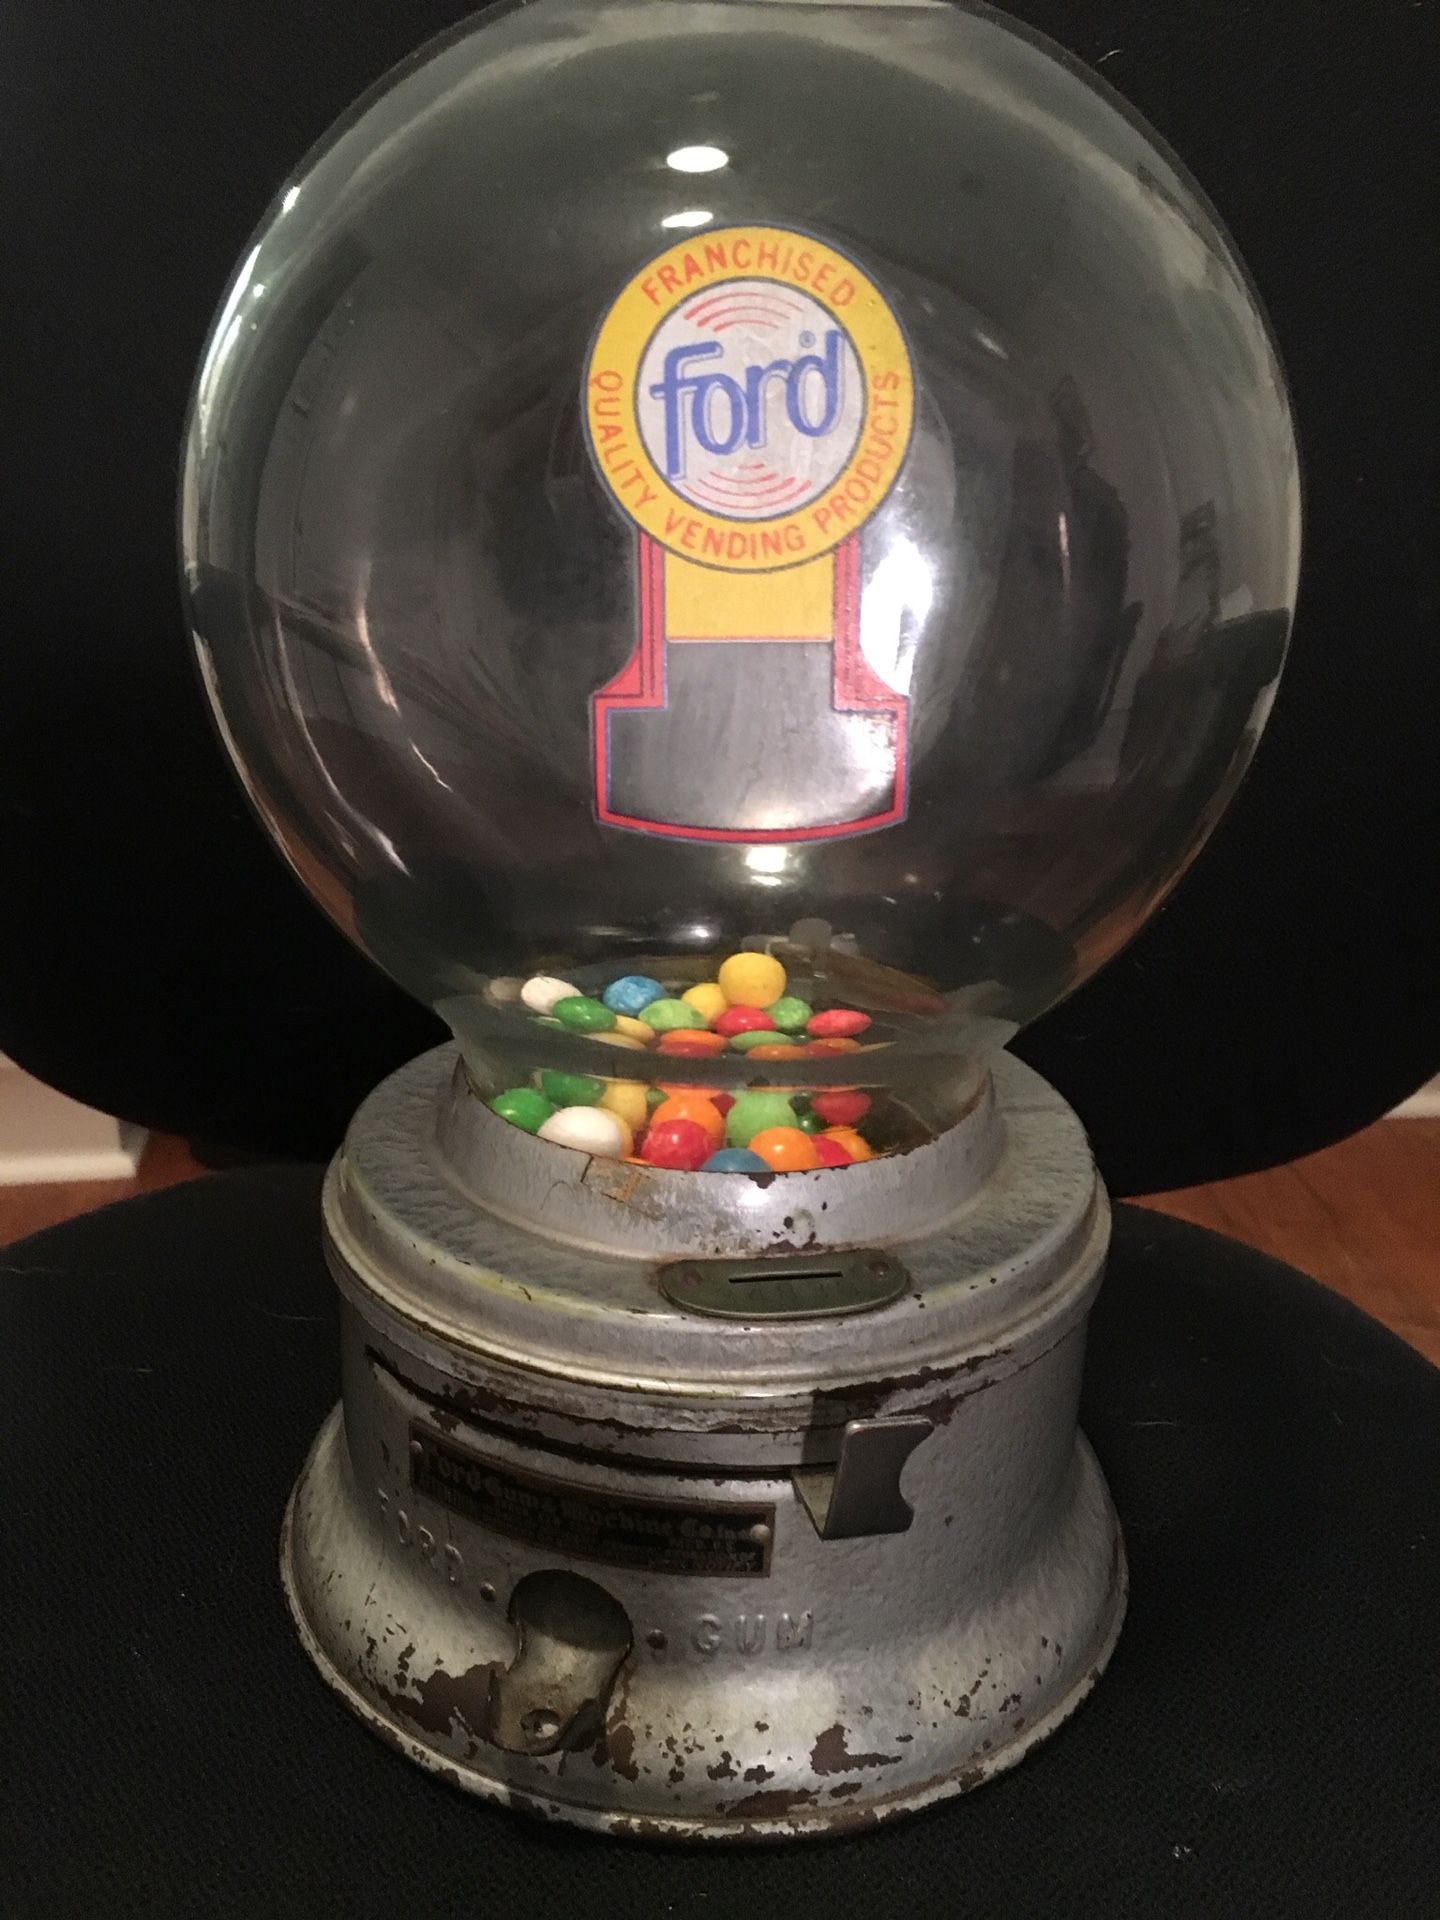 Ford Gum ball machine, early 1950's. Original condition with lock and keys. Functions! Great conversation piece for game room, home or office!